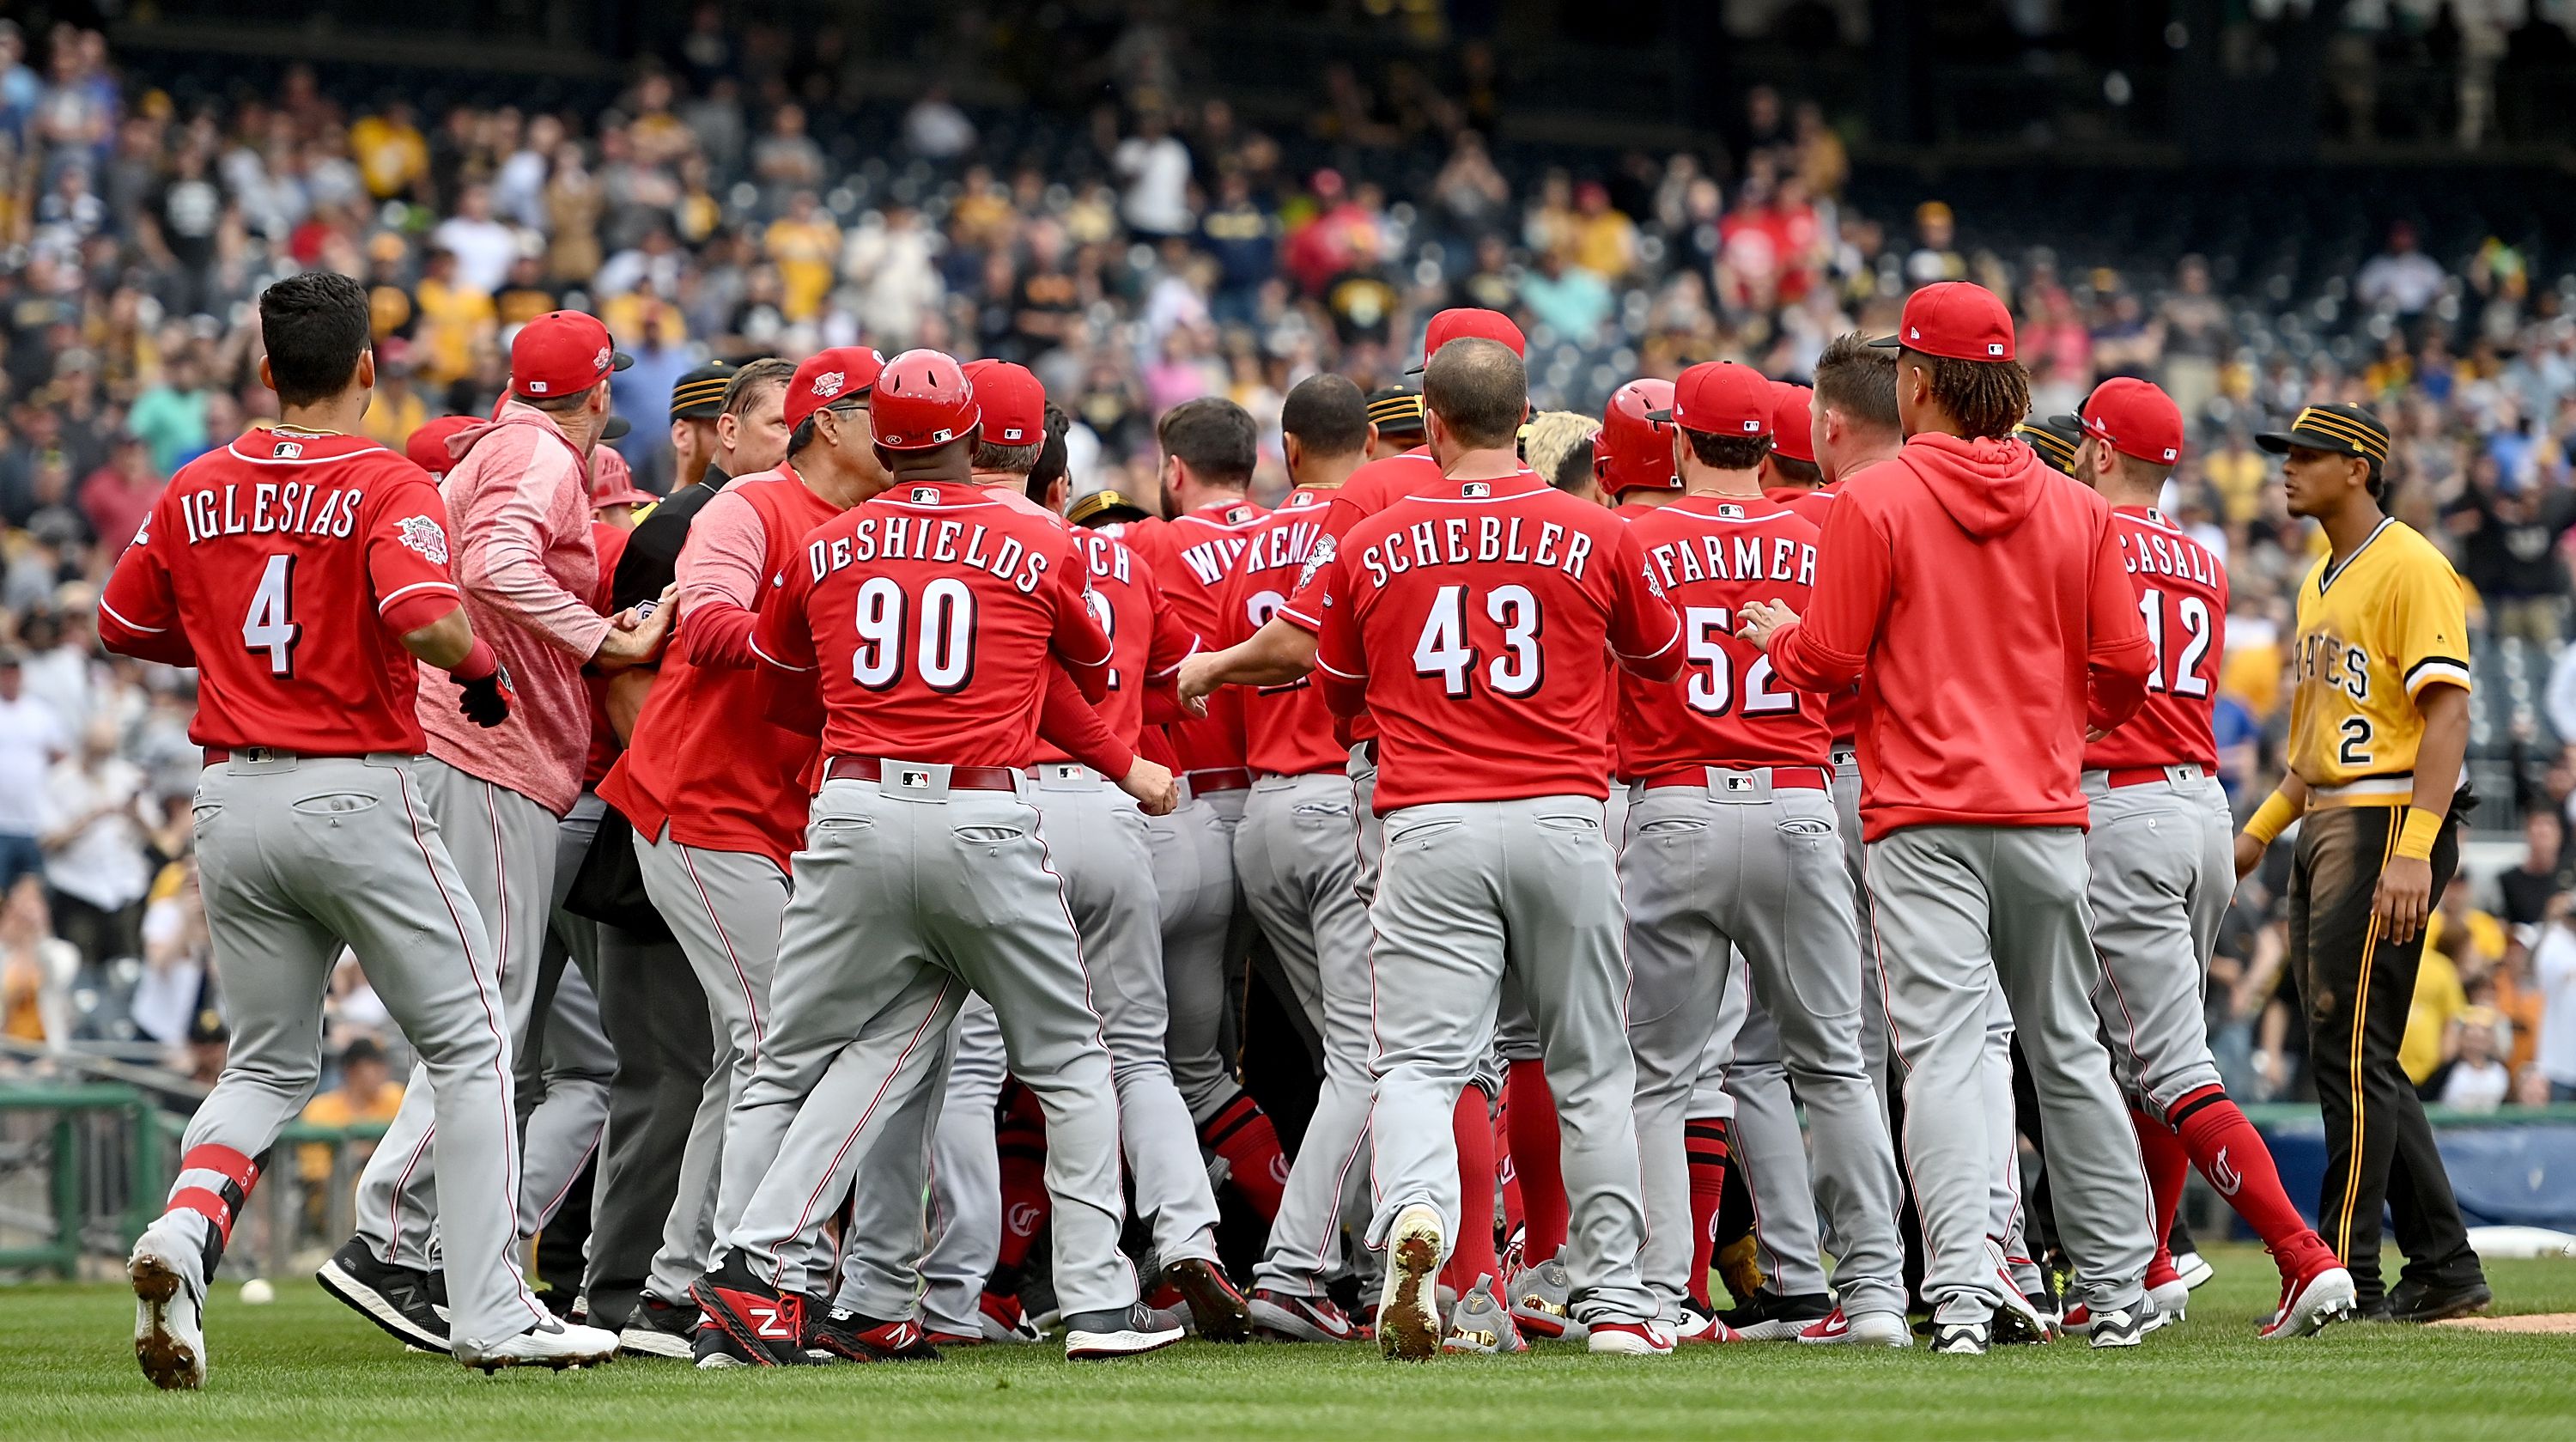 Reds-Pirates brawl: Chris Archer, Yasiel Puig, David Bell suspended and  fined by MLB for Sunday's fight 